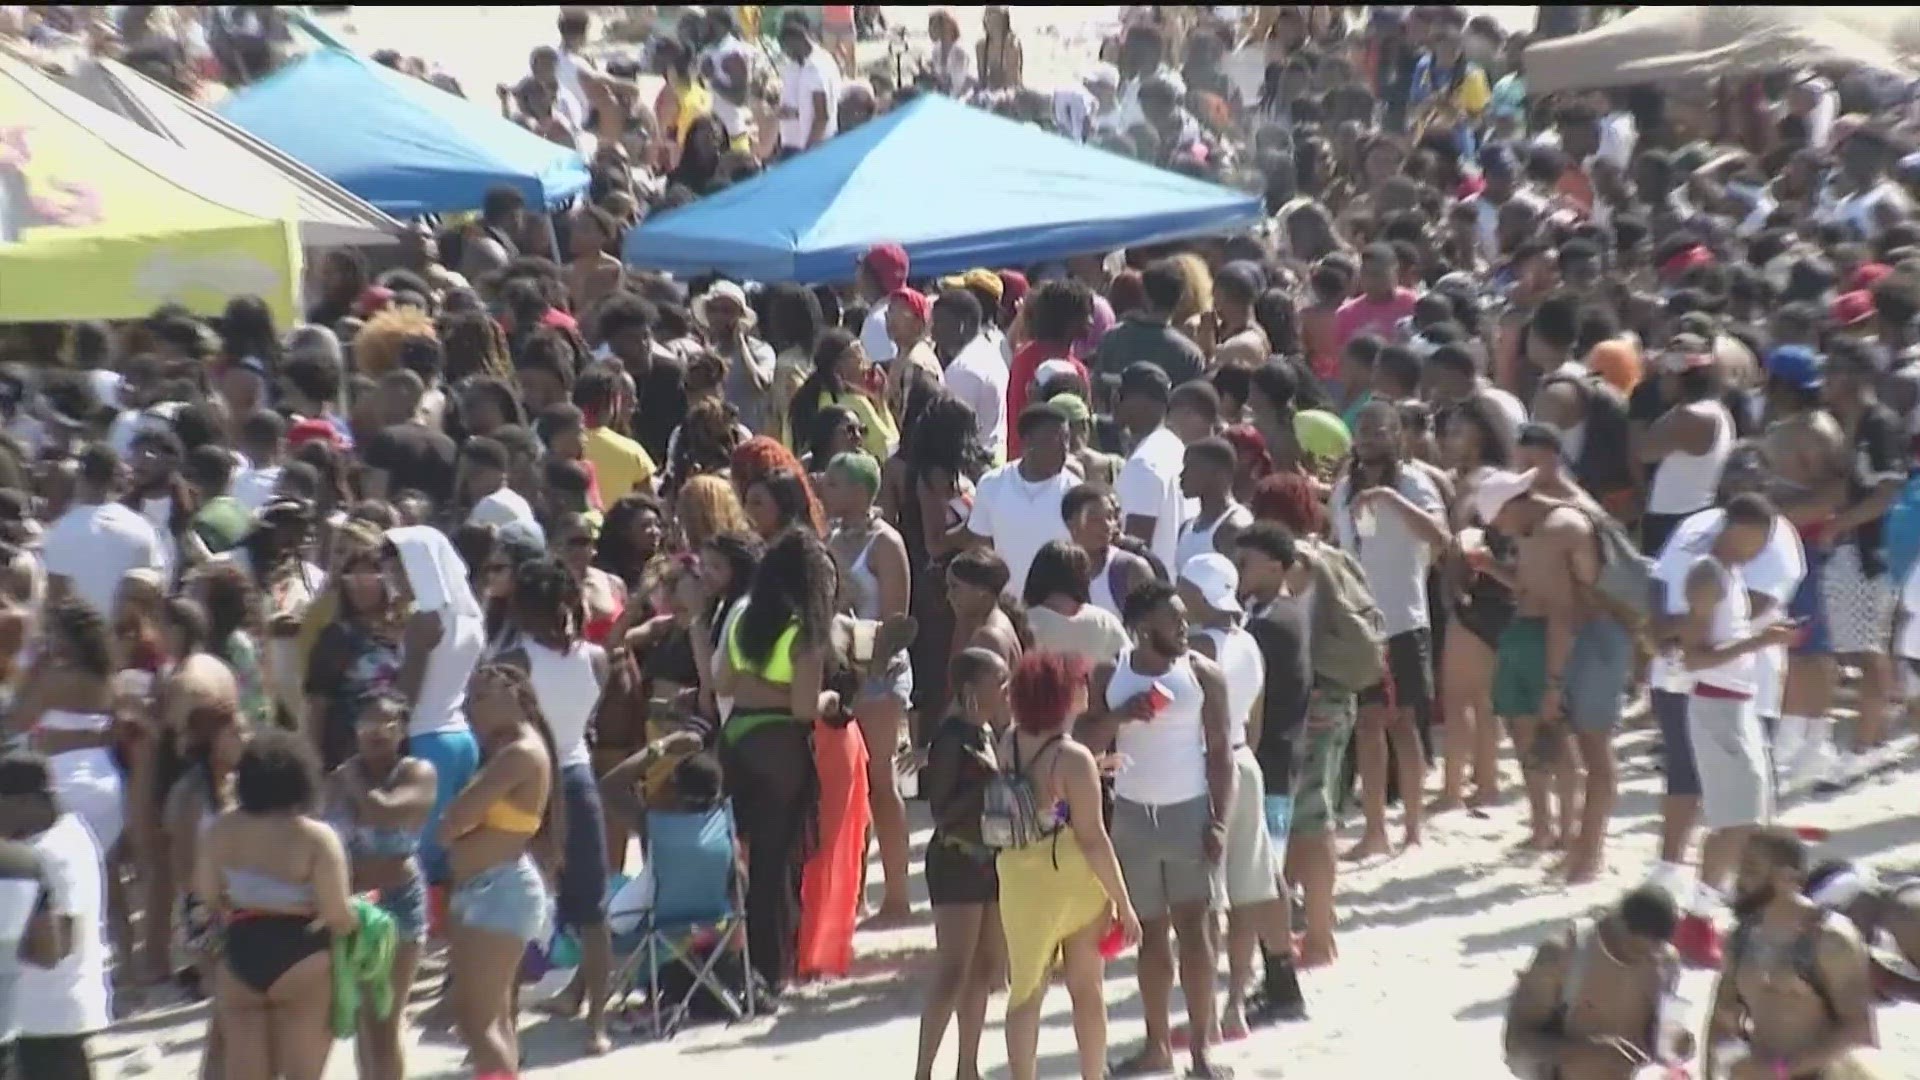 Thousands of Black college students expected for an annual spring bash at Georgia's largest public beach will be greeted by dozens of extra police officers.